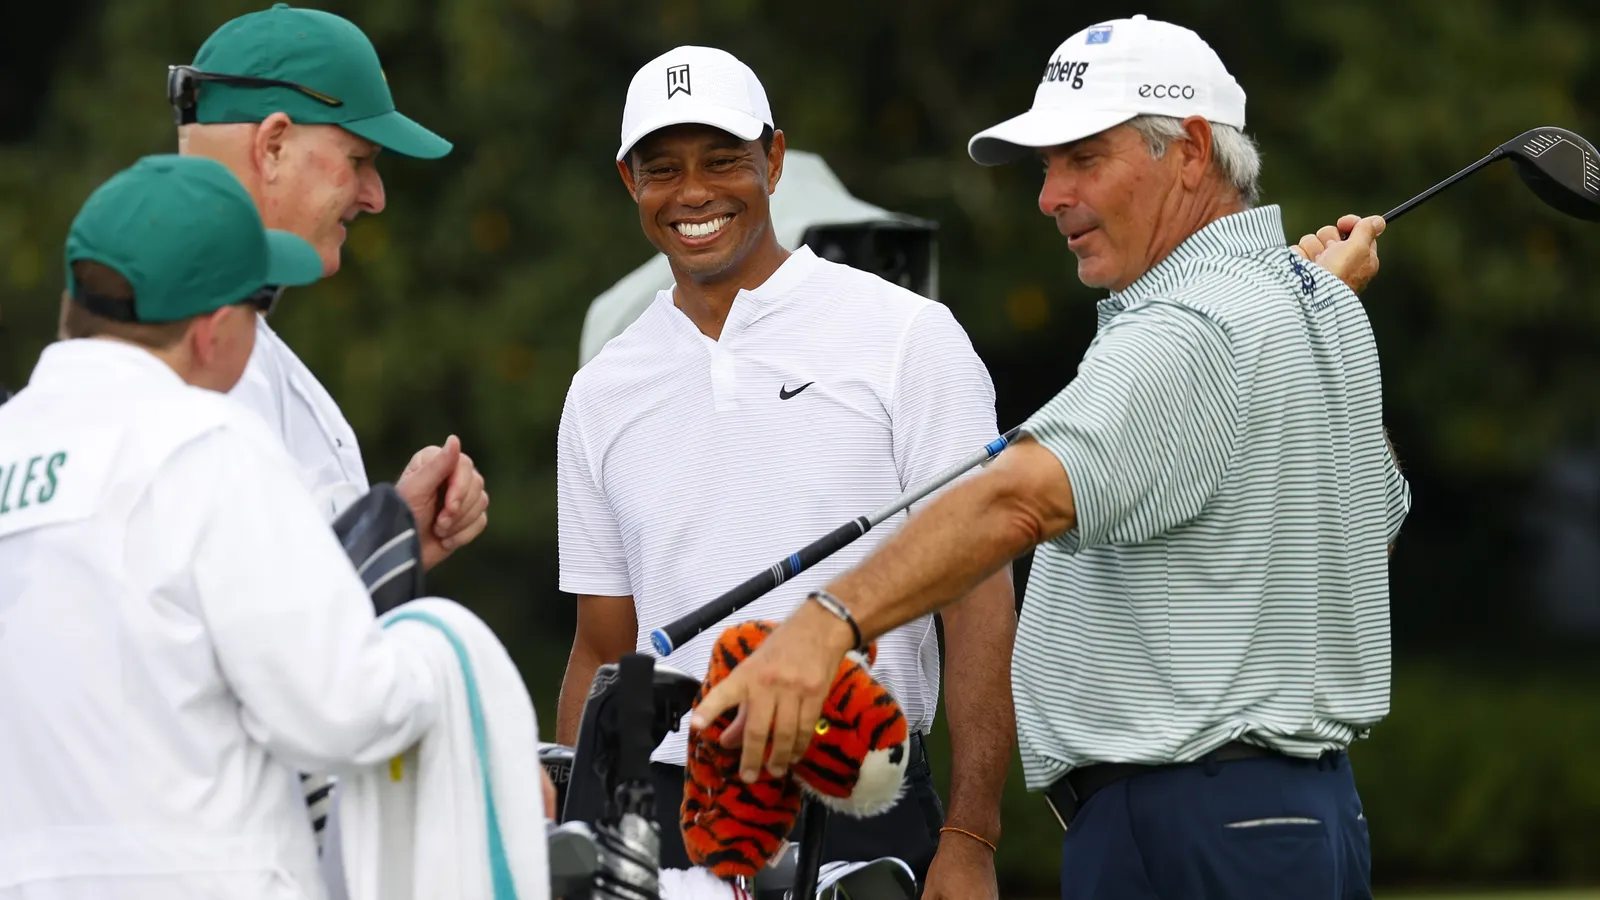 Tiger Woods can challenge at the Masters says former Green Jacket winner